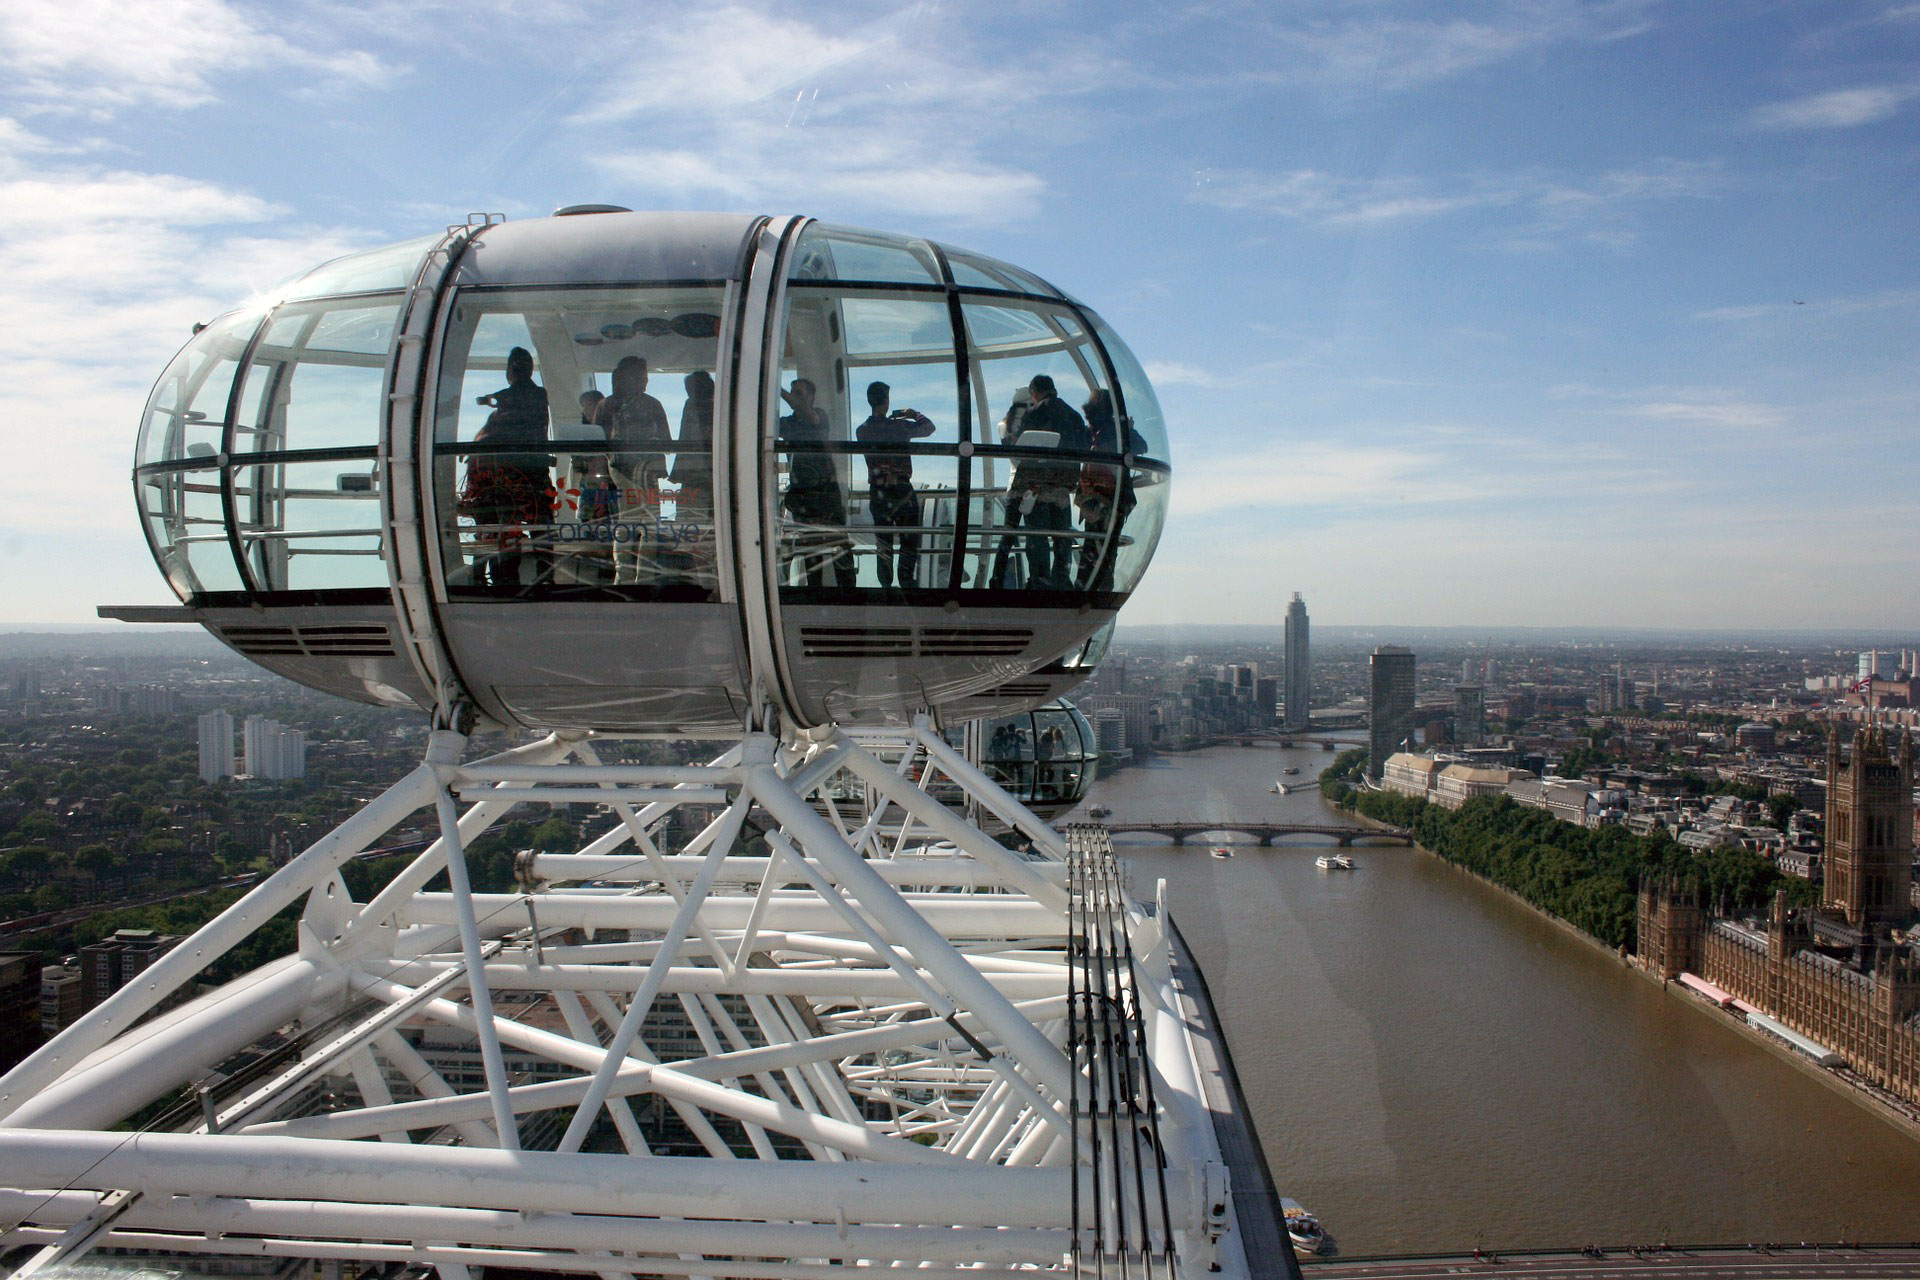 The London Eye above the city